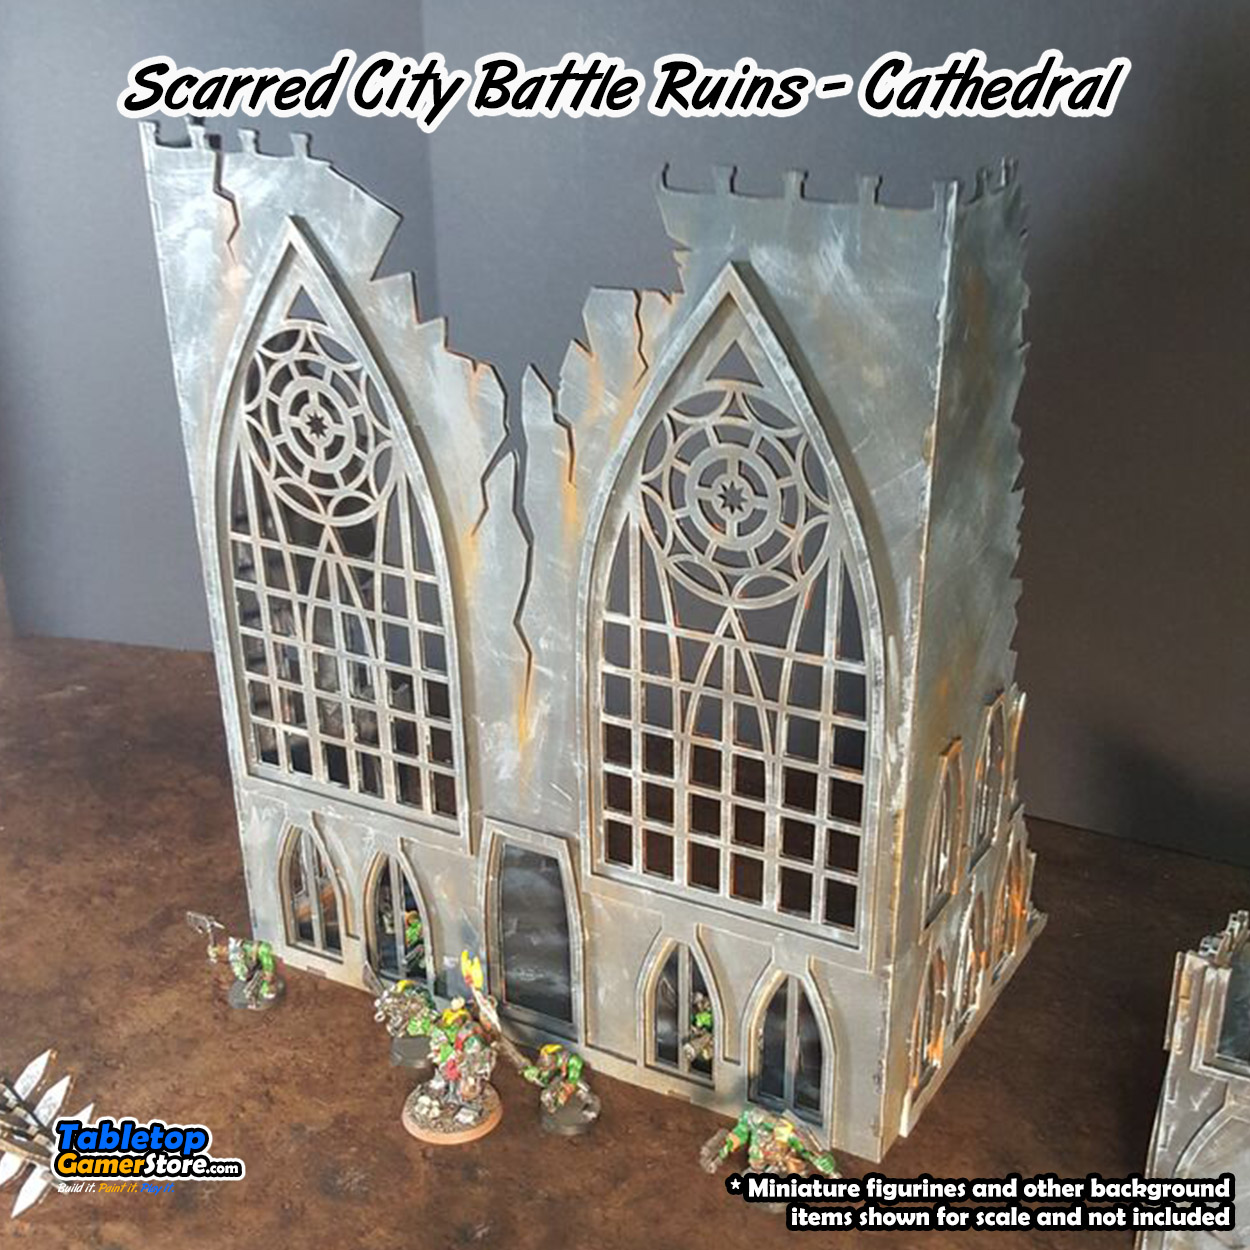 scarred_city_battle_ruins_cathedral_04